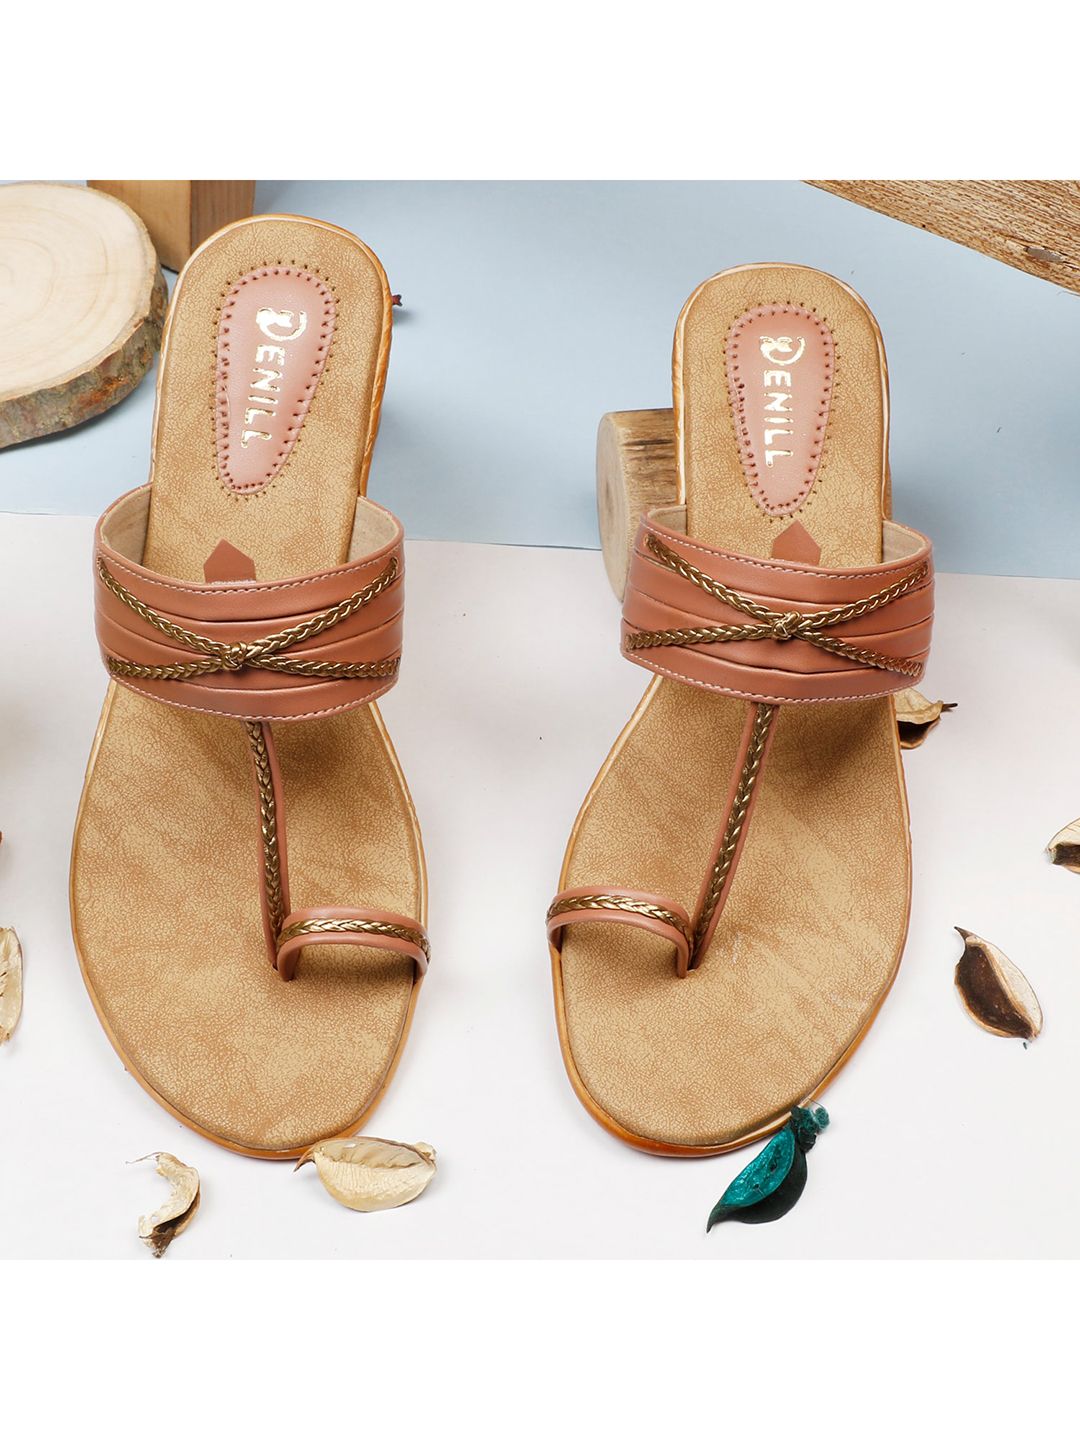 Denill Peach-Coloured & Rose Gold-Toned Braided Woven Design One-Toe Wedges Price in India